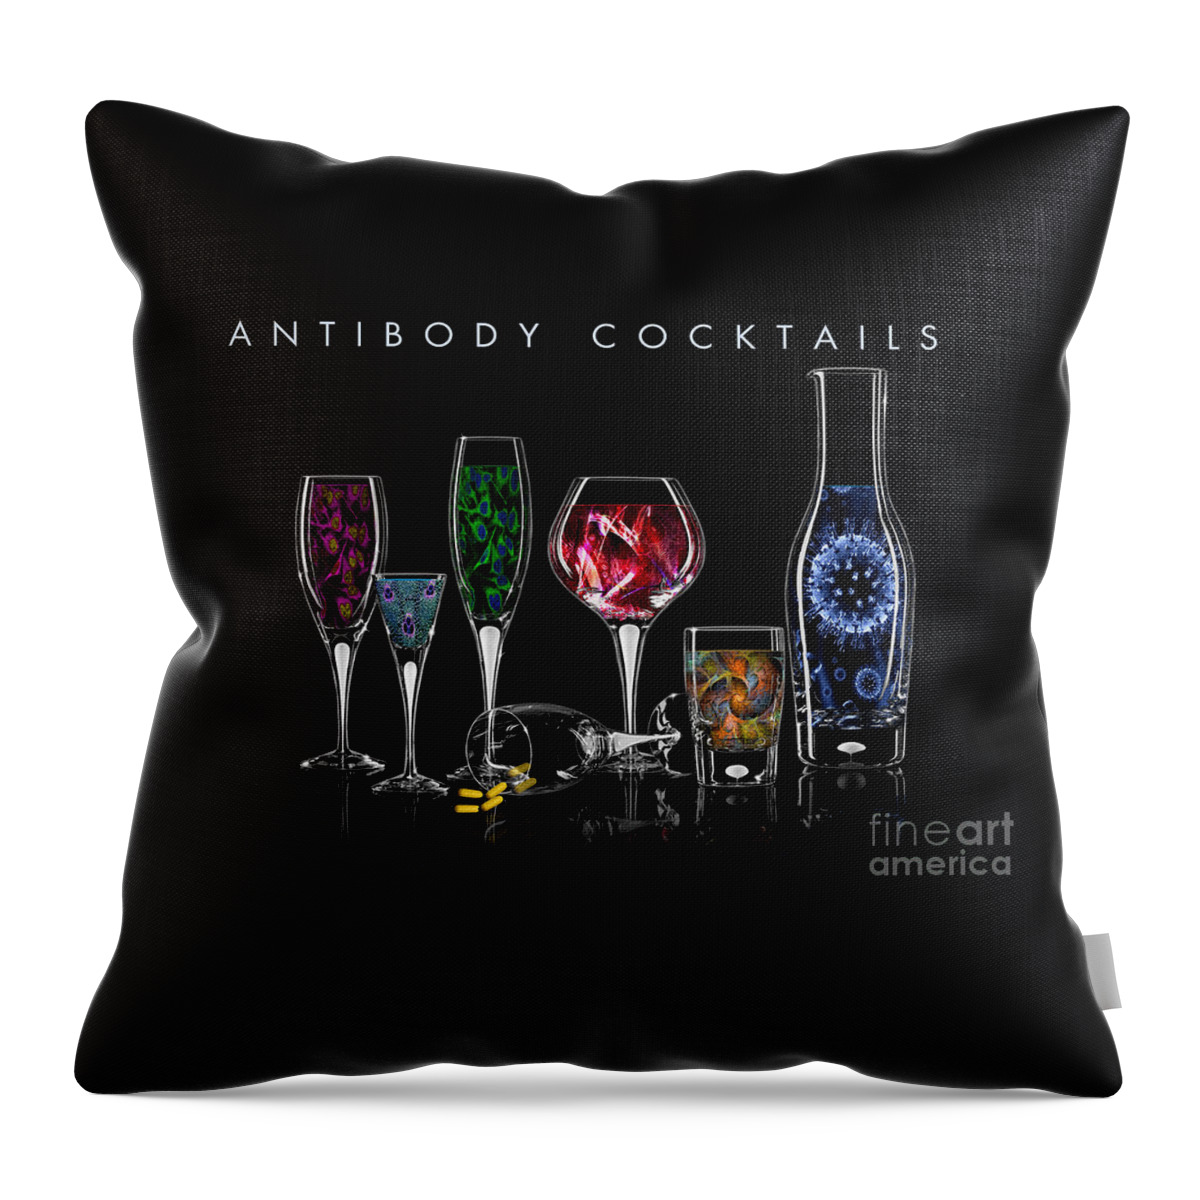 Aides Research Throw Pillow featuring the digital art Antibody Cocktails by Megan Dirsa-DuBois